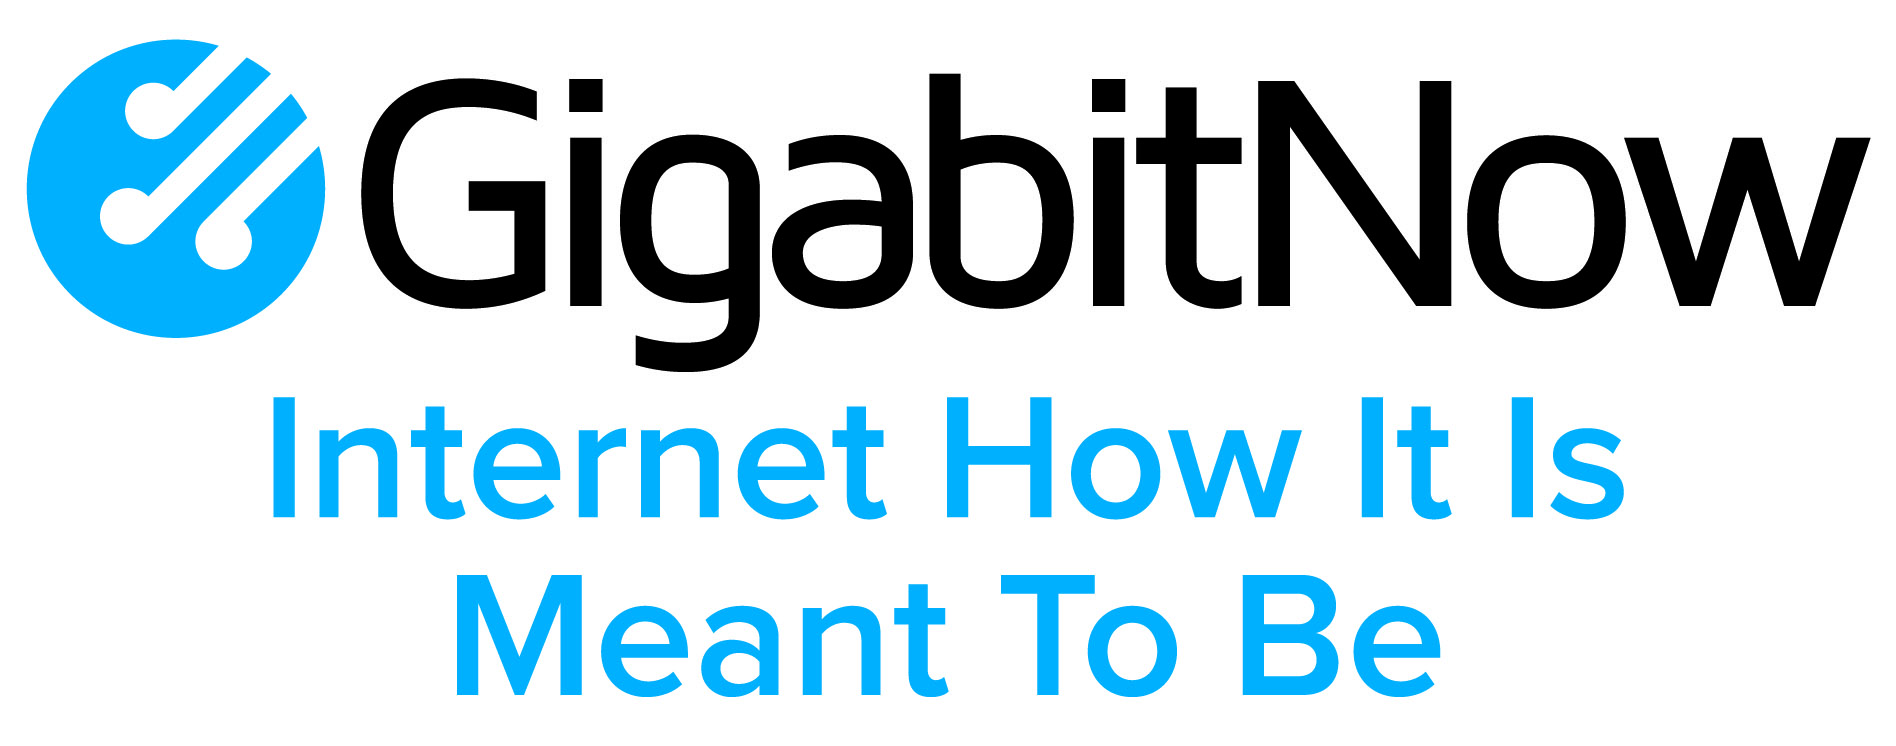 GigabitNow - Internet How It Is Meant To Be